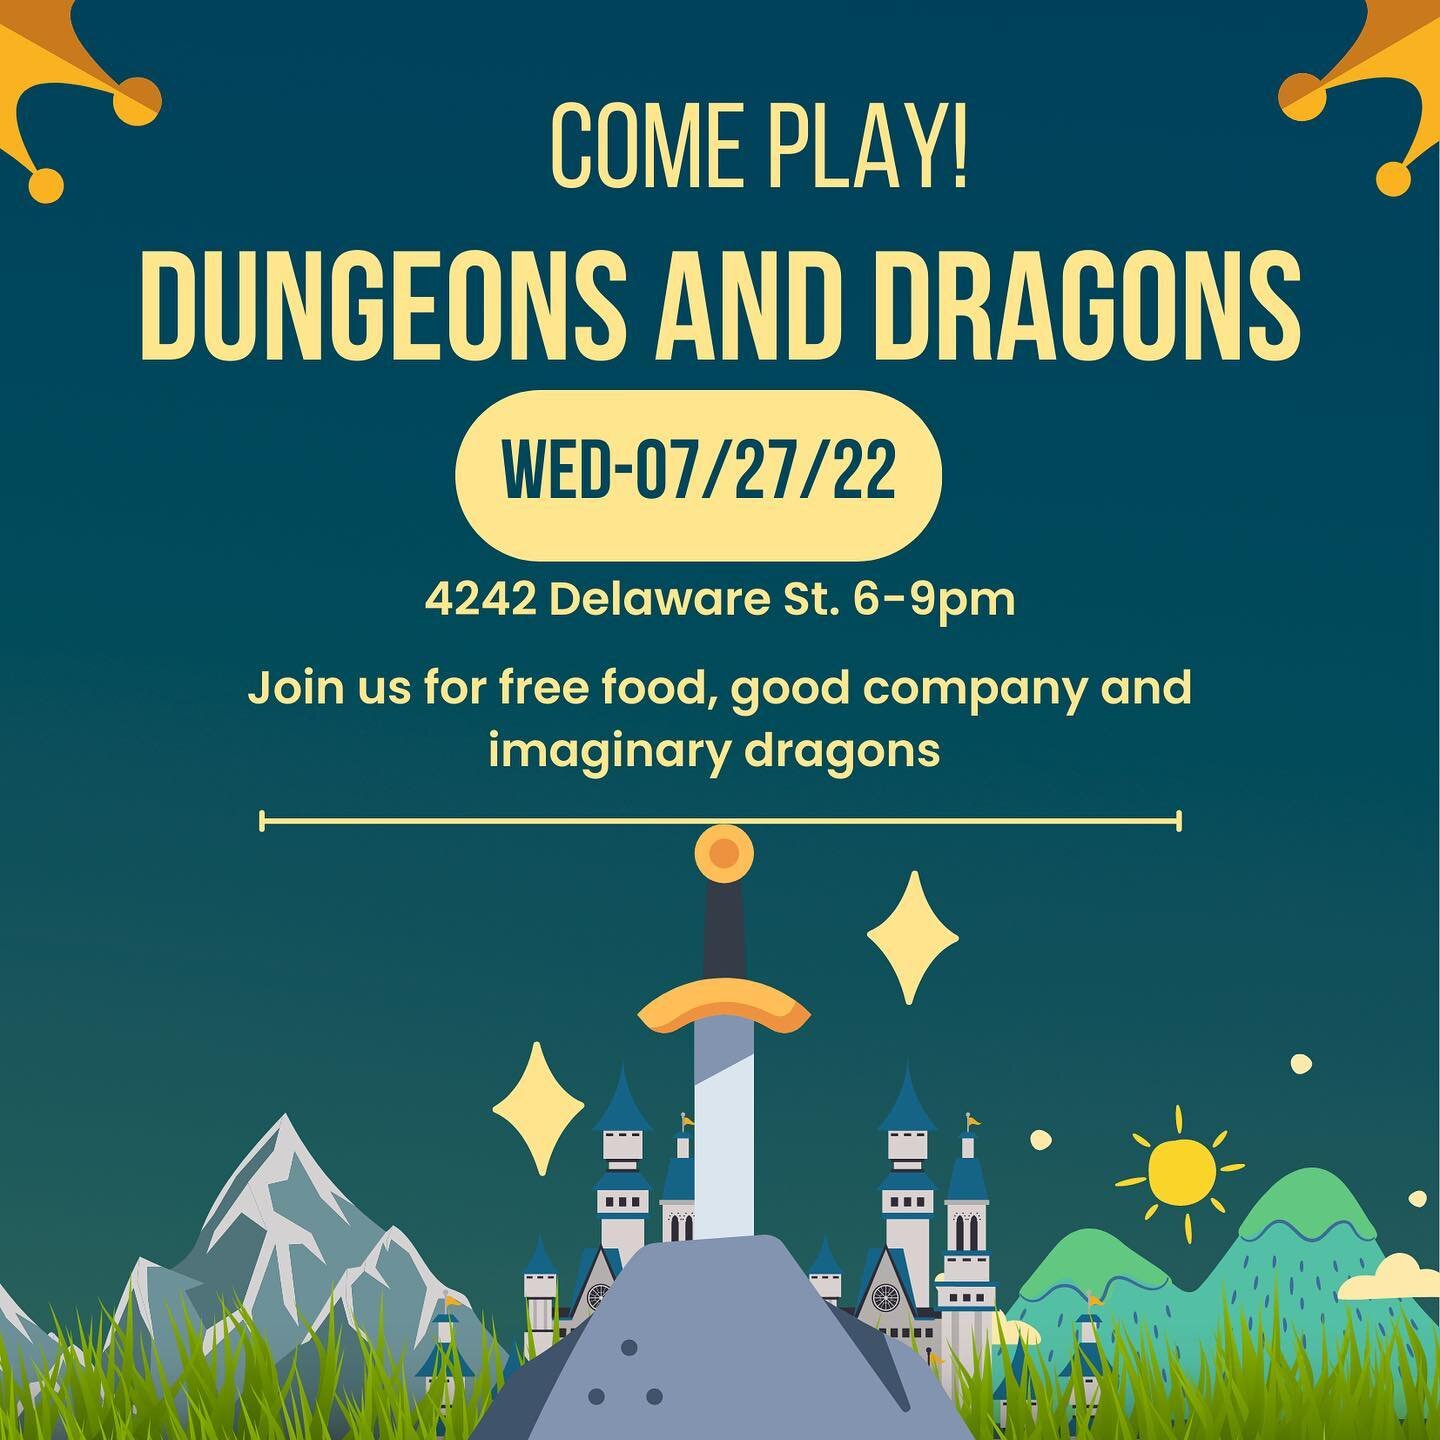 Hey everyone come out tonight for our monthly DND game! Be at 4242 Delaware St. @ 6pm. Can't wait to see y'all!

#gayboy#dnd#gamenight#dungeonsanddragons#lbgt#dungeonmaster#gaydenverevents#gaydenver